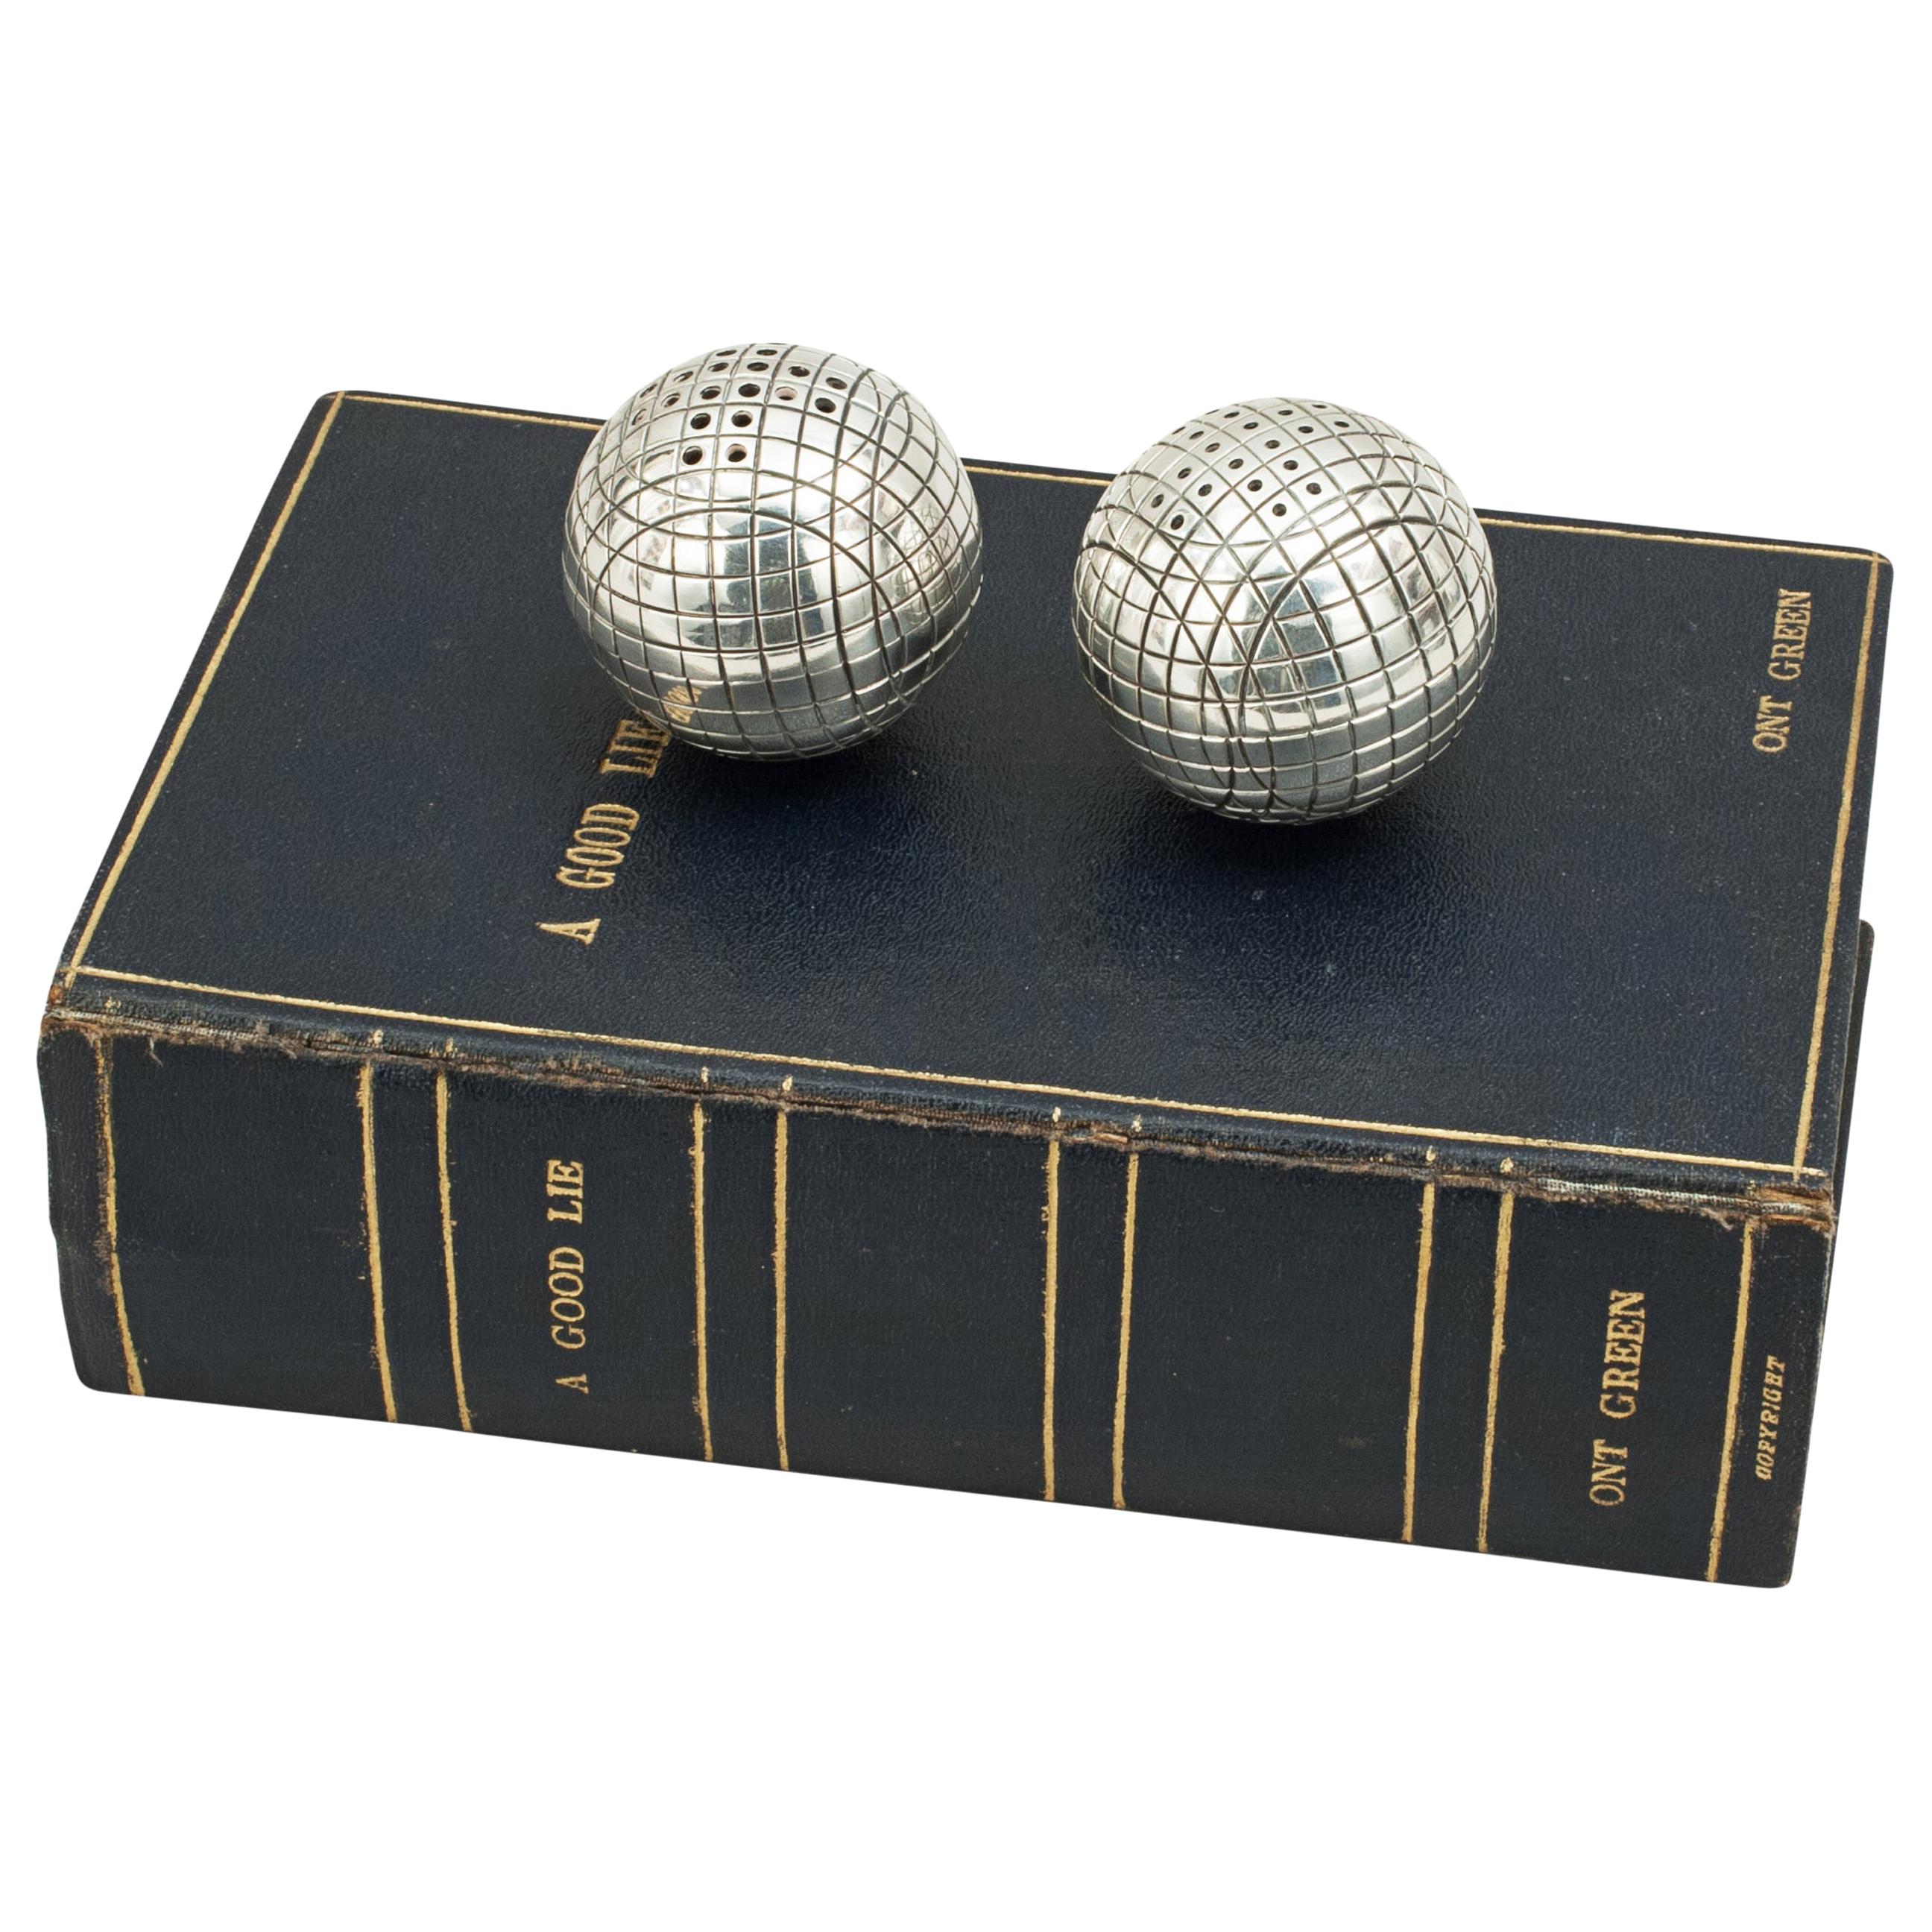 Antique Pair of Salt and Pepper Golf Balls in Leather Book, A Good Lie